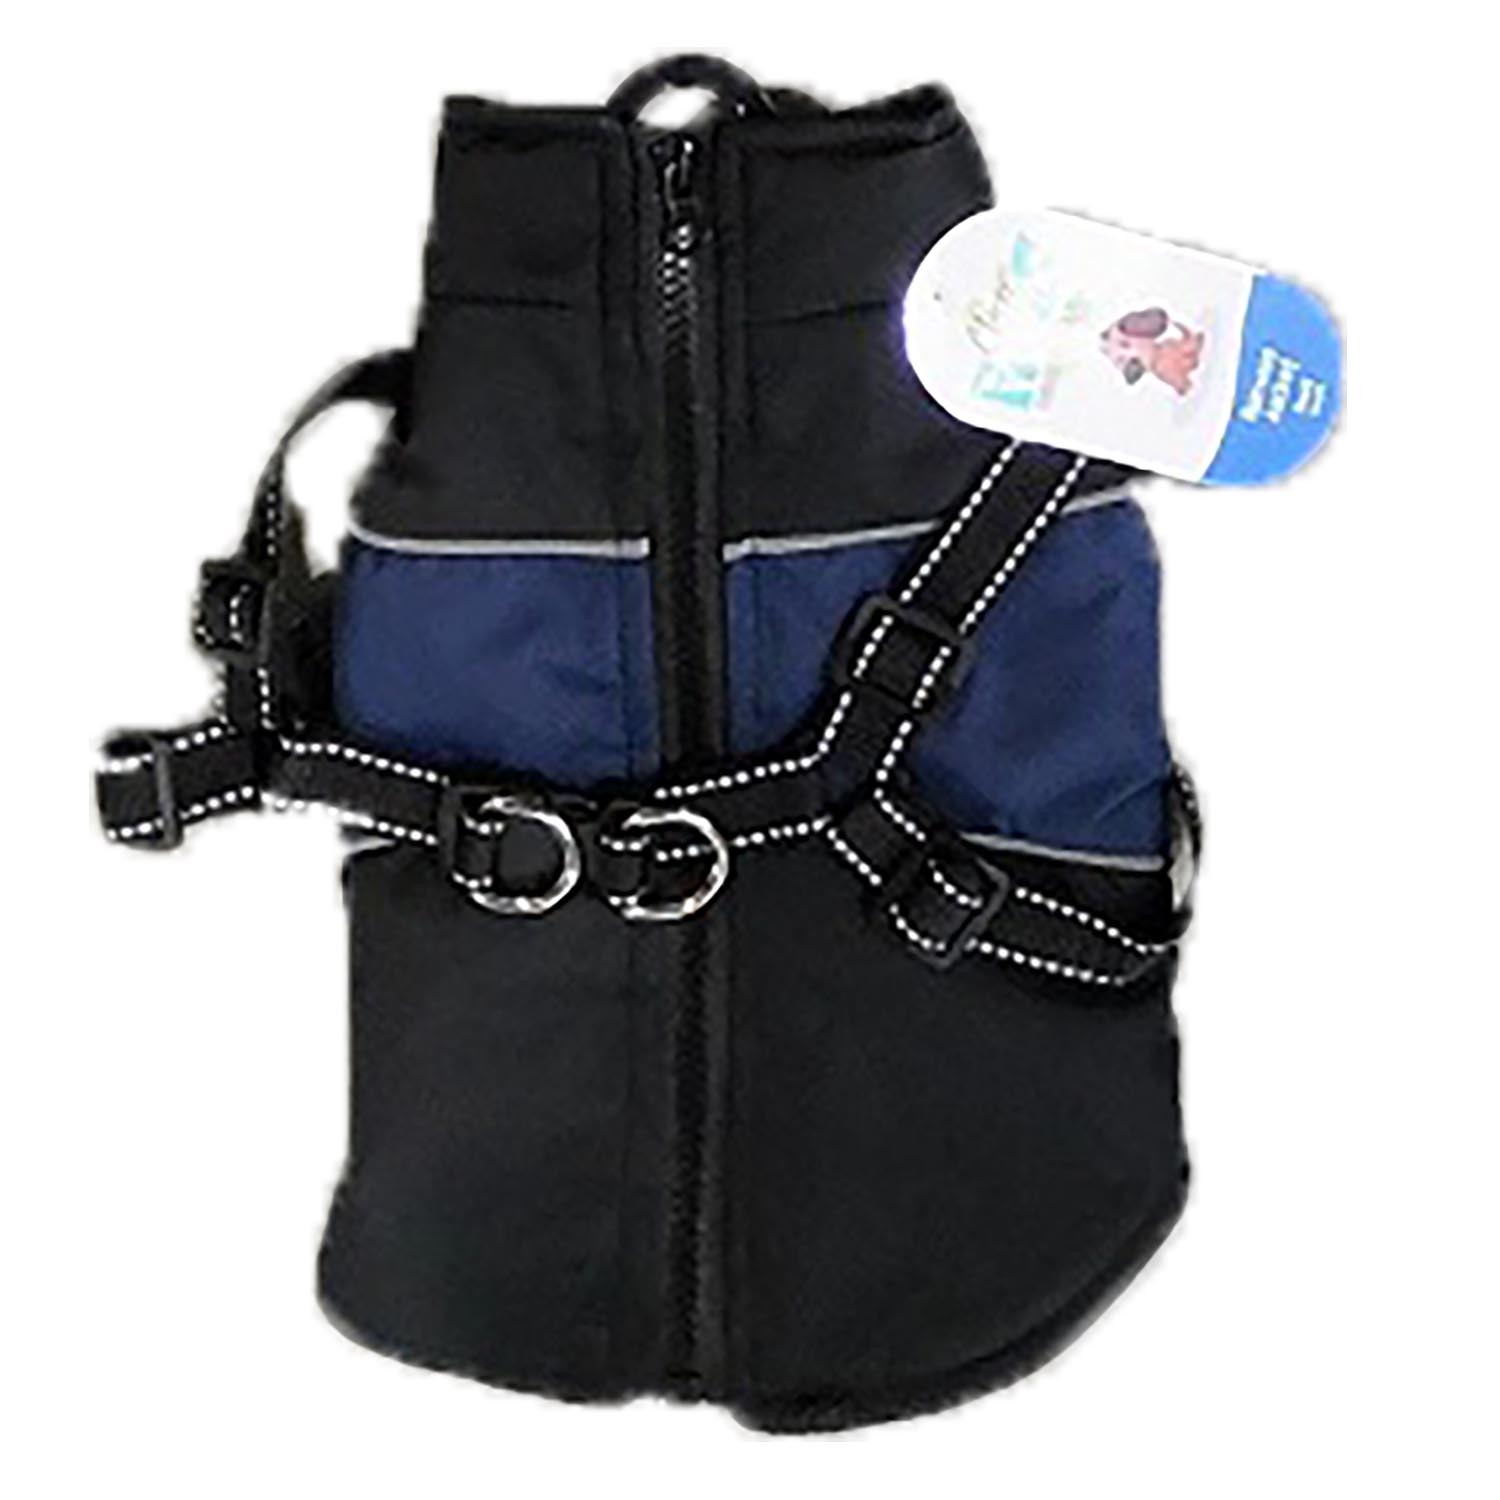 Clever Paws 25cm Padded Harness Dog Jacket Image